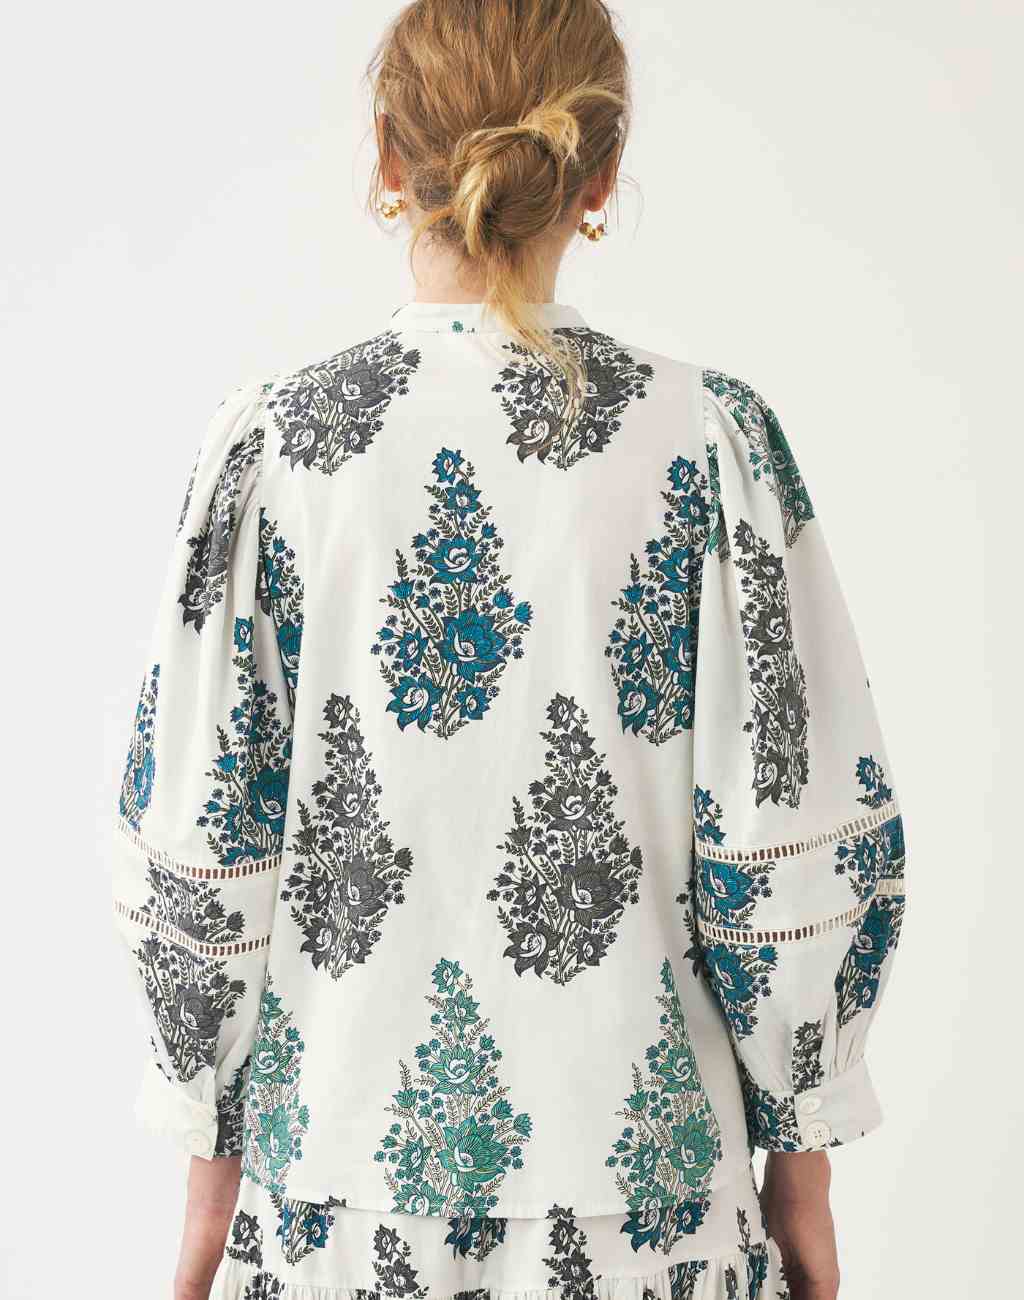 Cotton Poplin Muguet Blouse with Puffed Sleeves and Lace Ribbon Inserts